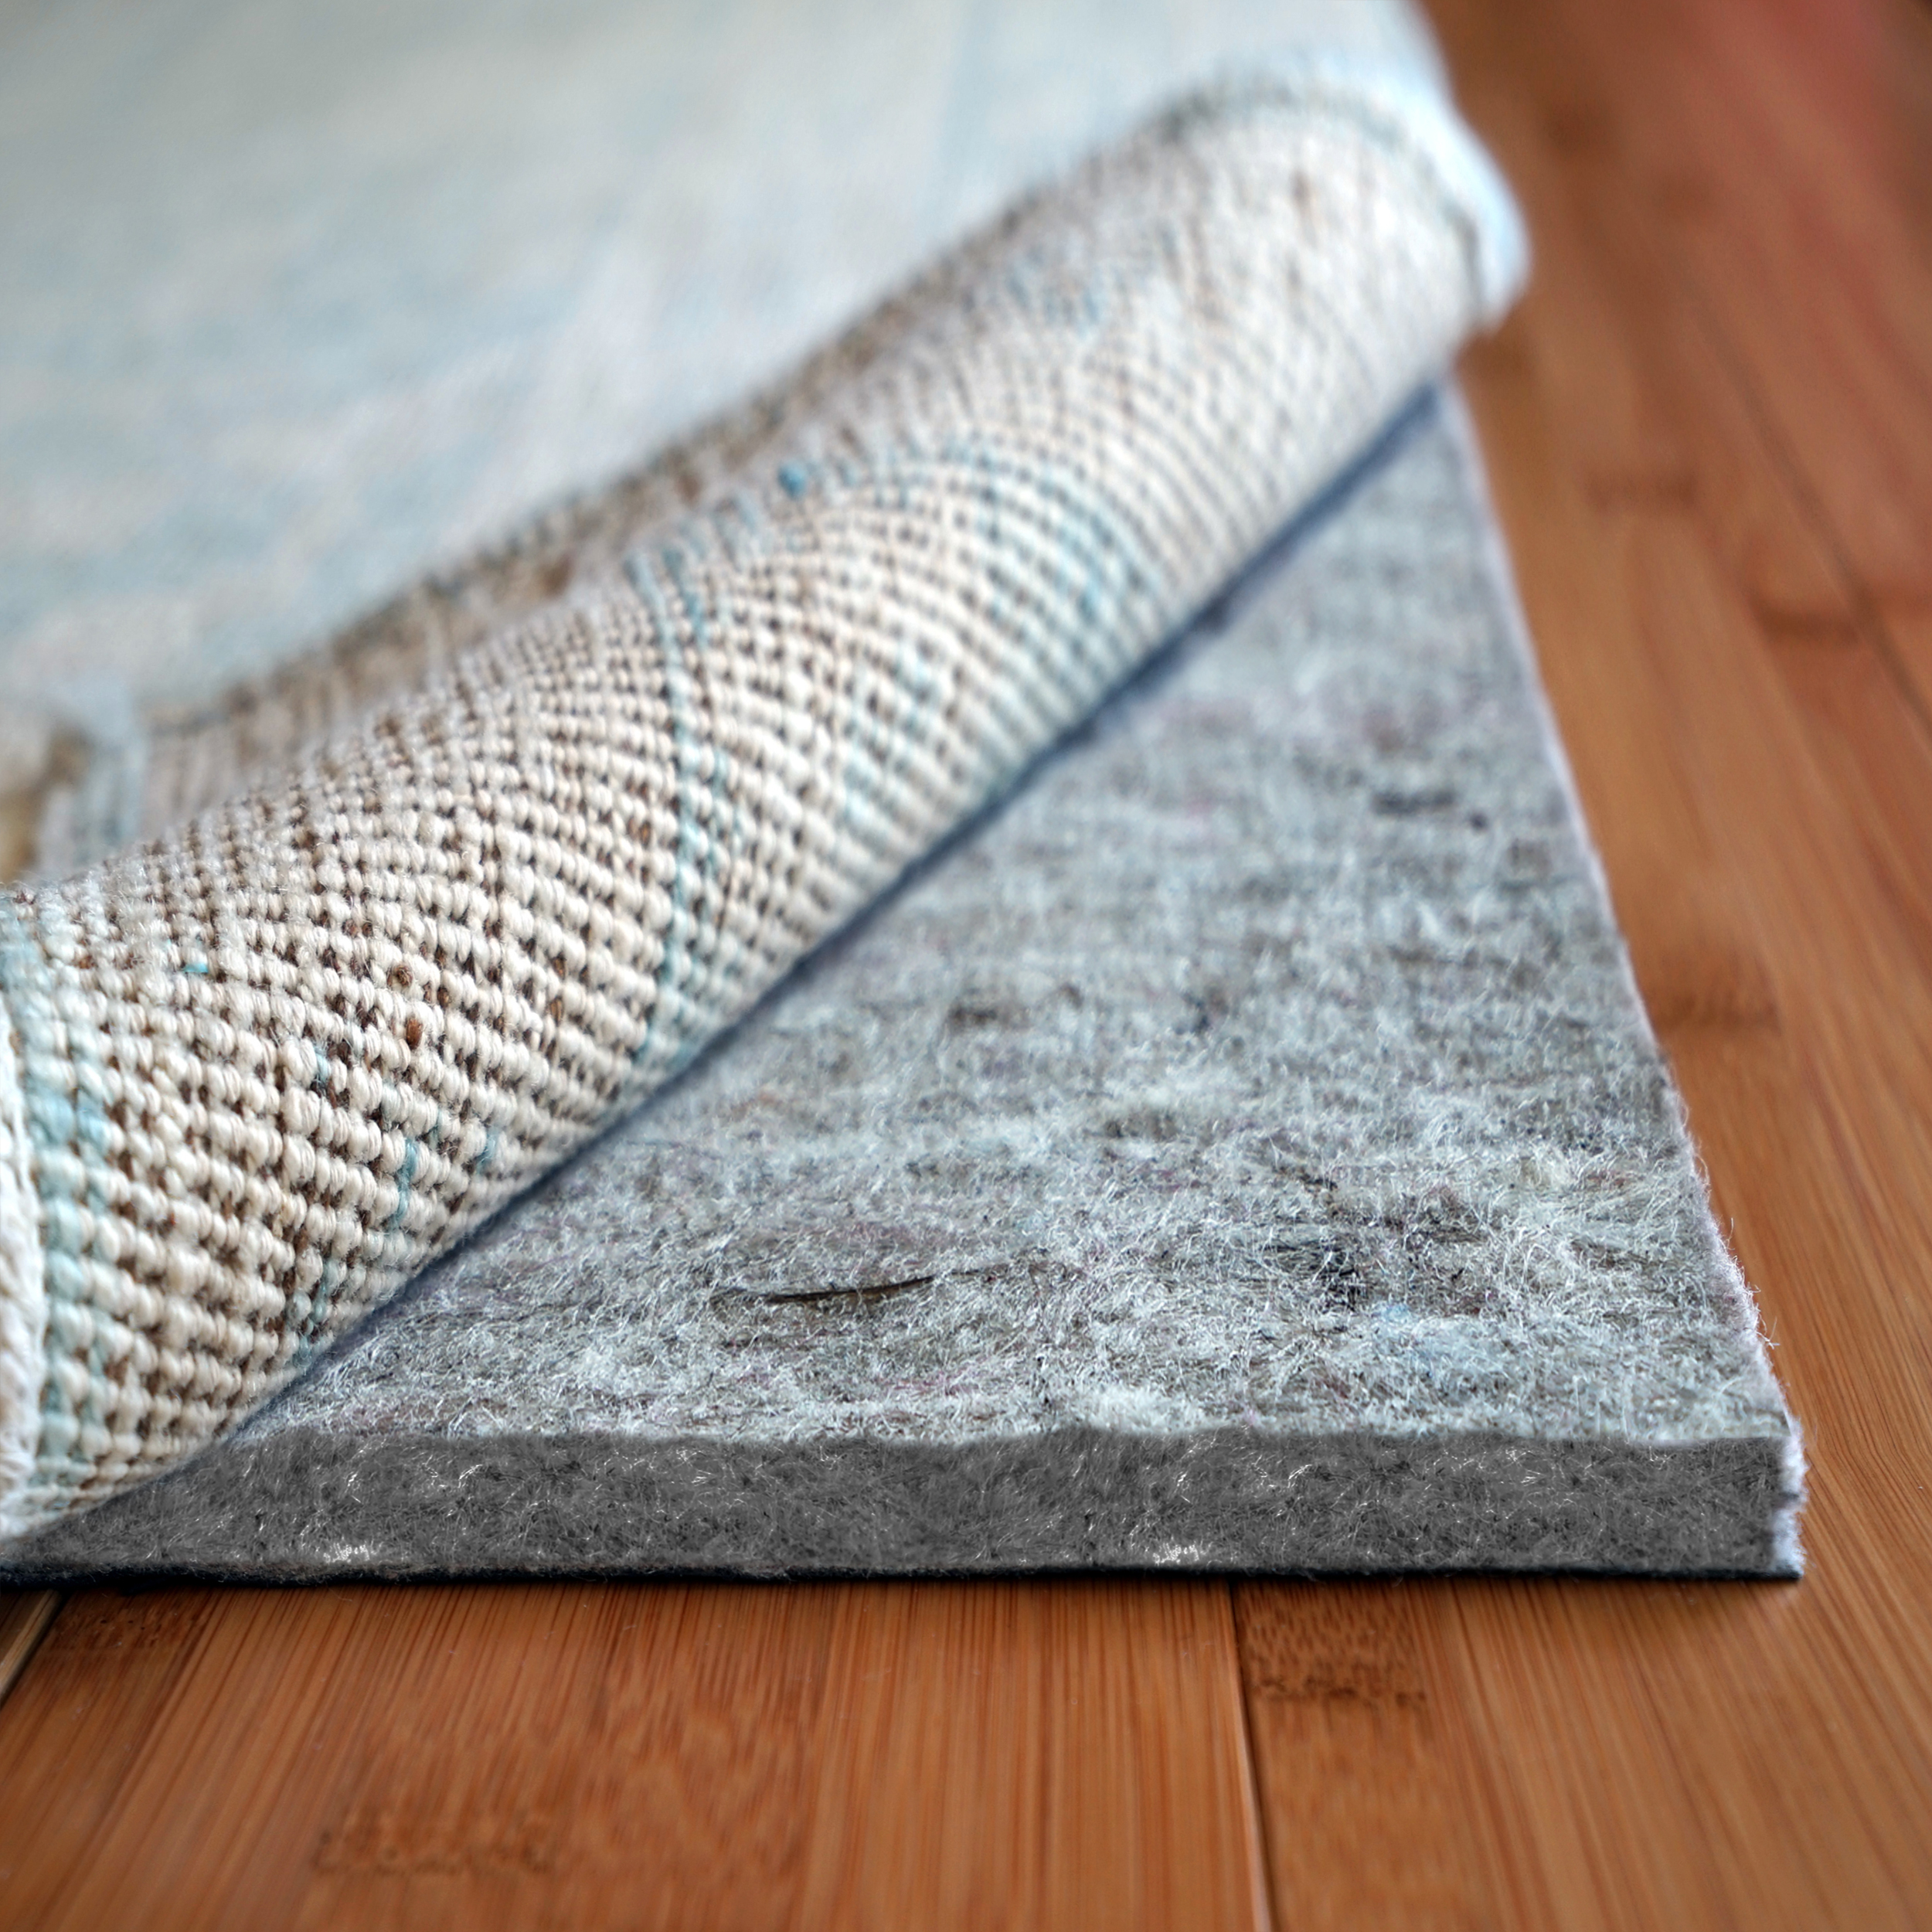 RUGPADUSA - Superior-Lock - 4'x6' - 7/16" Thick - Felt + Rubber - Luxury Non-Slip Rug Pad - Perfect for Hardwood Floors, Available in 2 Thicknesses, Many Custom Sizes - image 1 of 8